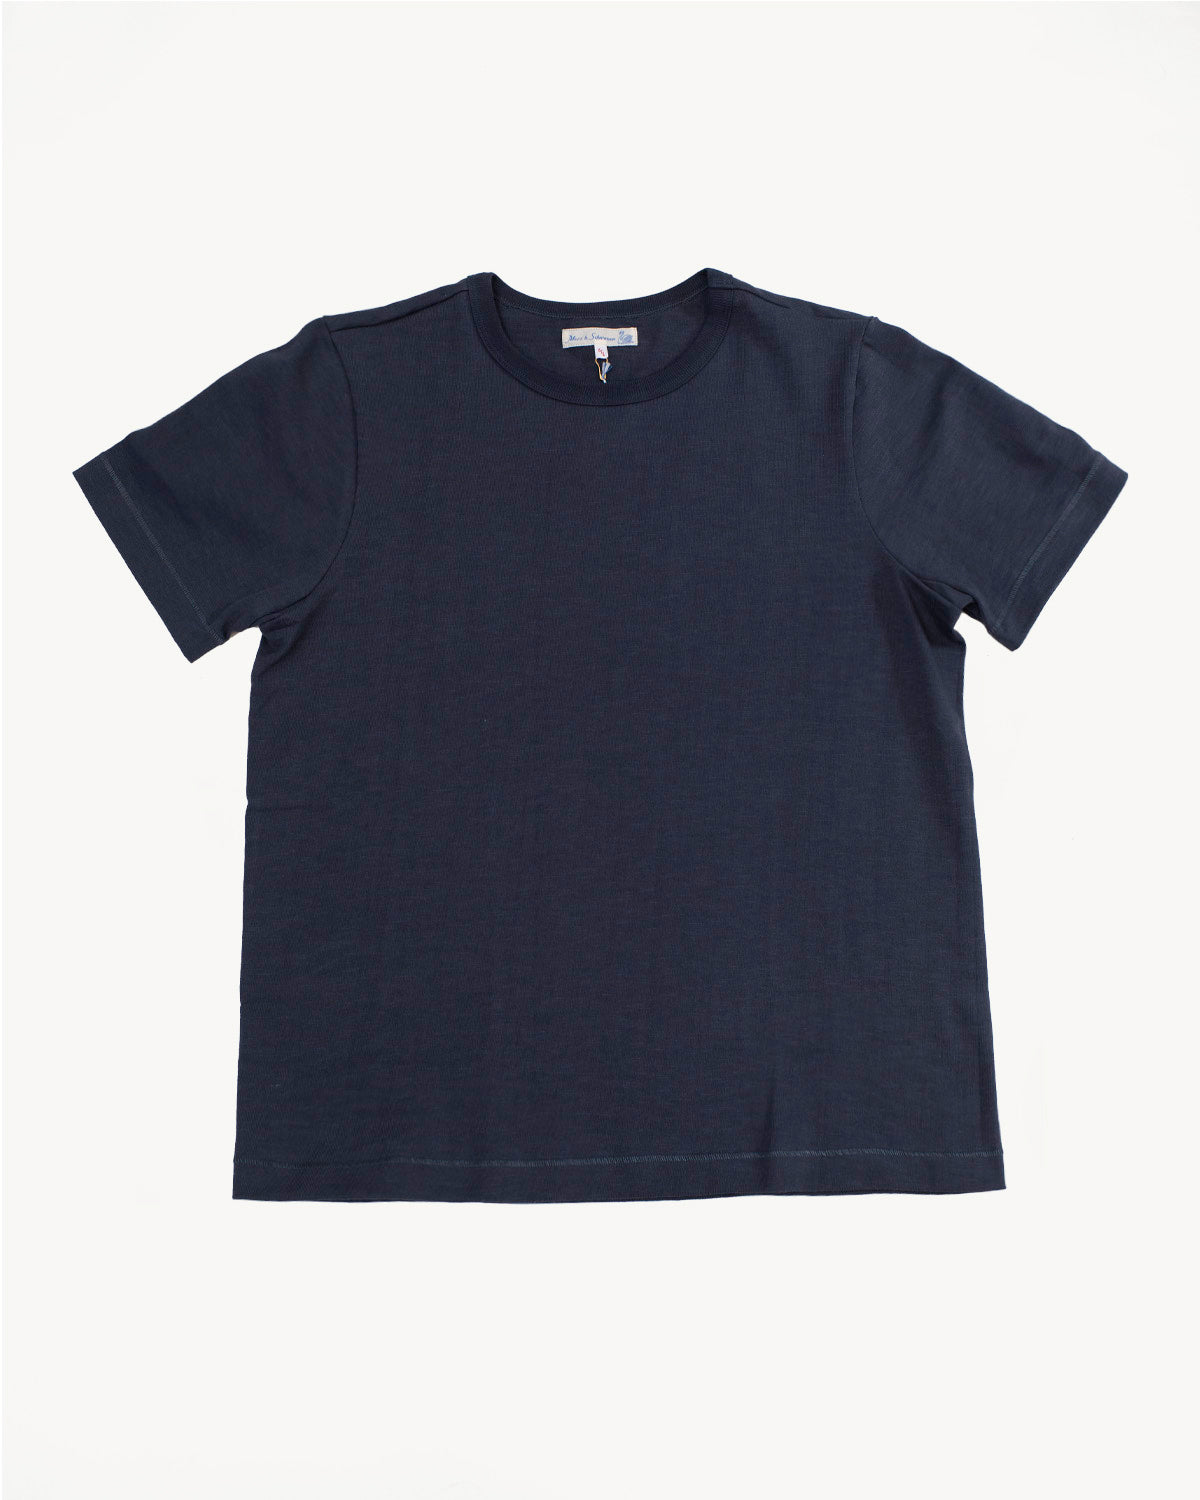 2S14.50 - 13.4oz Loopwheeled Heavy T-Shirt Relaxed Fit - Navy